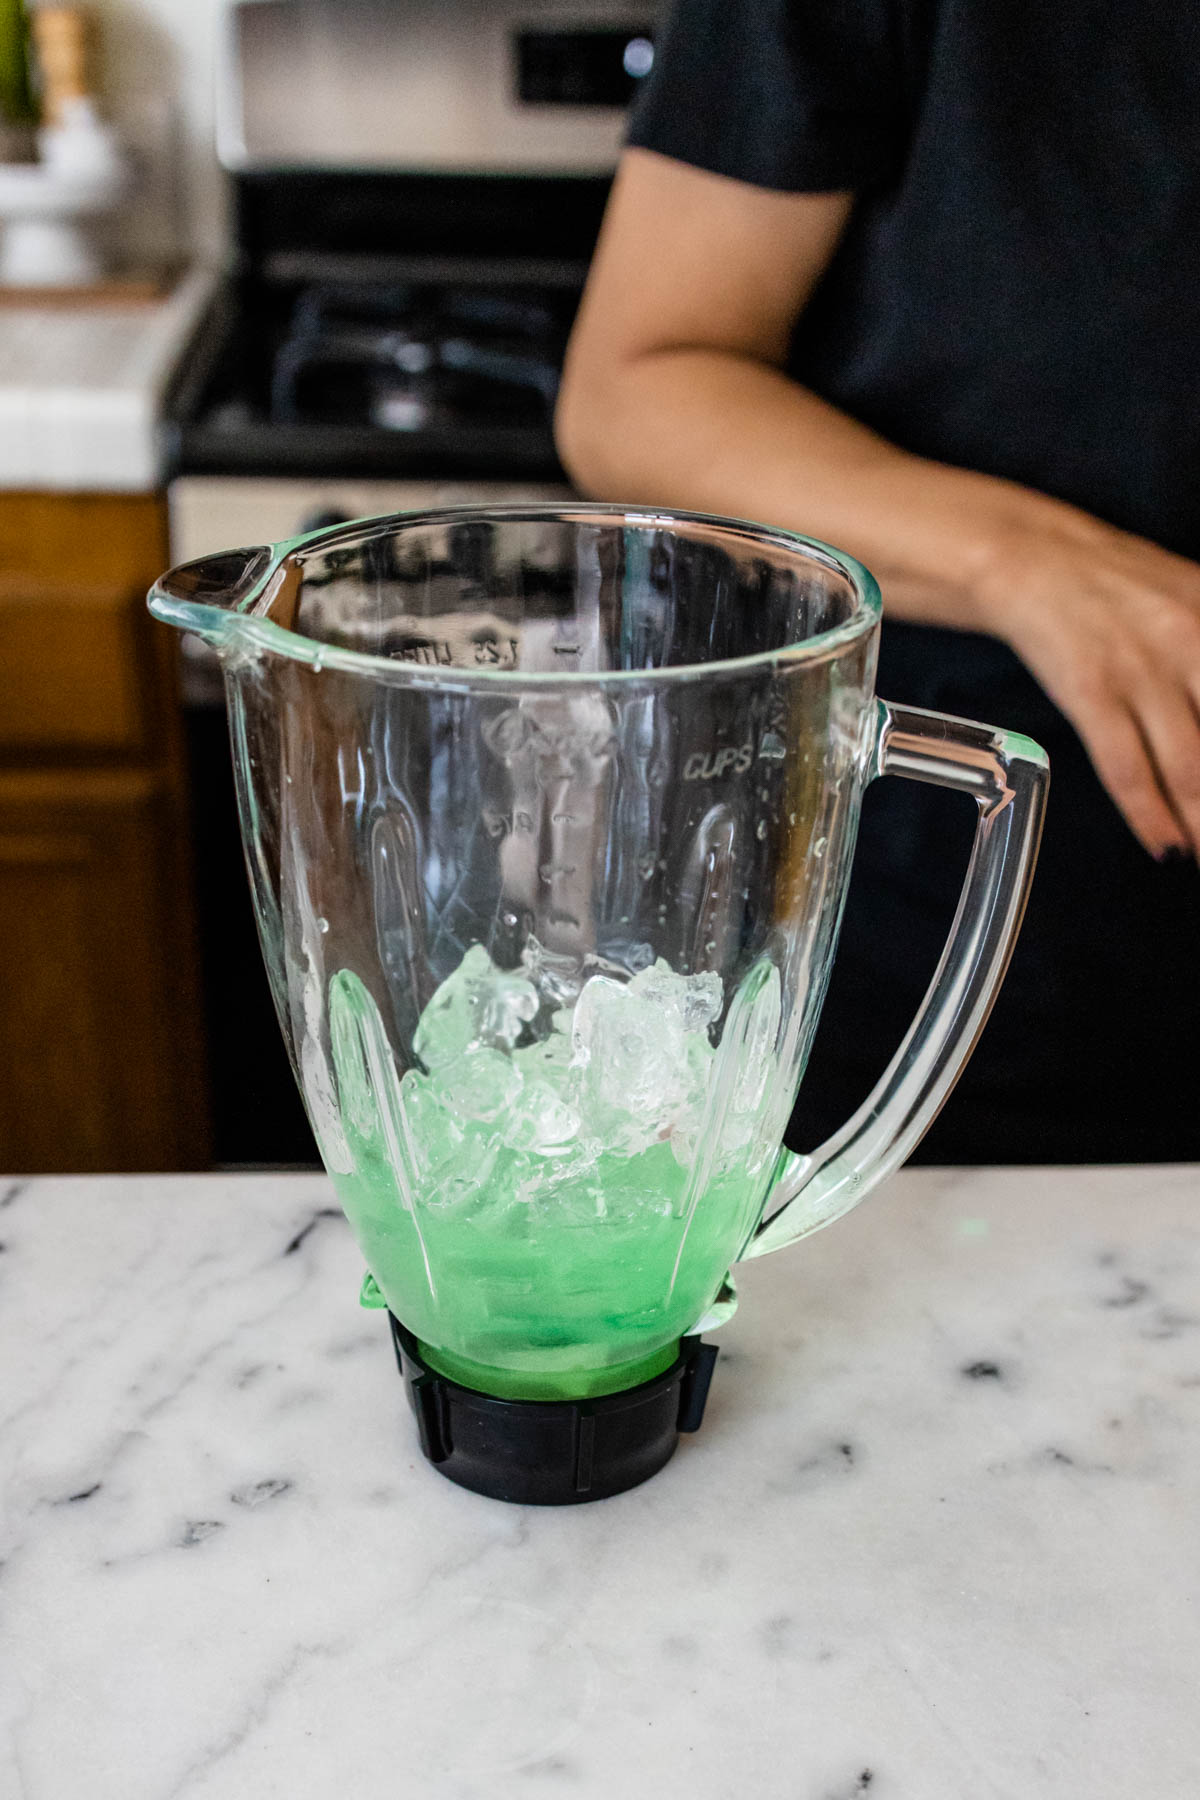 A blender holding a green liquid and ice.